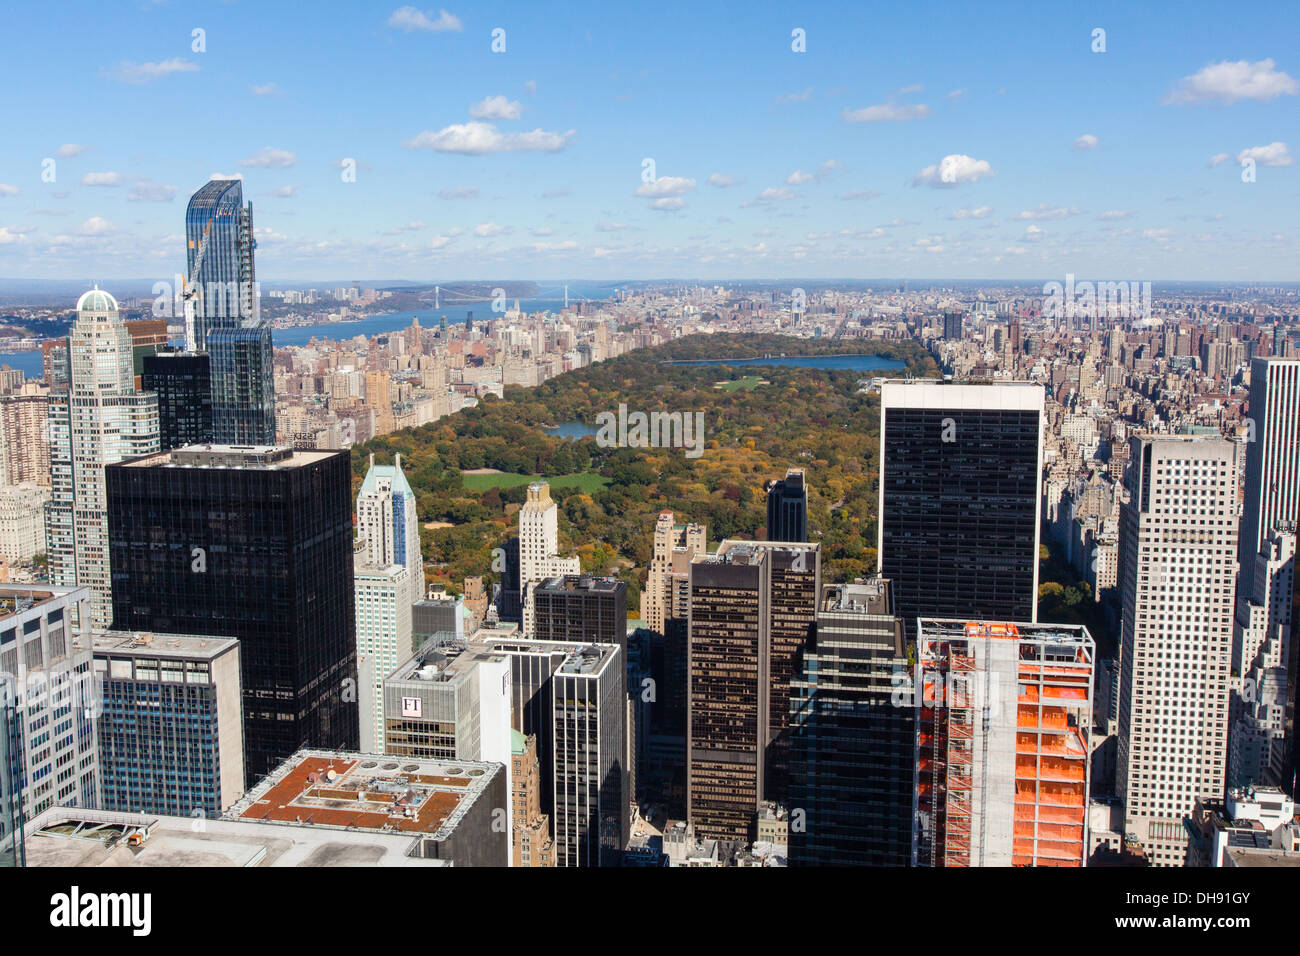 View from the Top of the Rock looking over Central Park, Rockefeller Center observation deck, New York City, NYC, USA, U.S.A Stock Photo